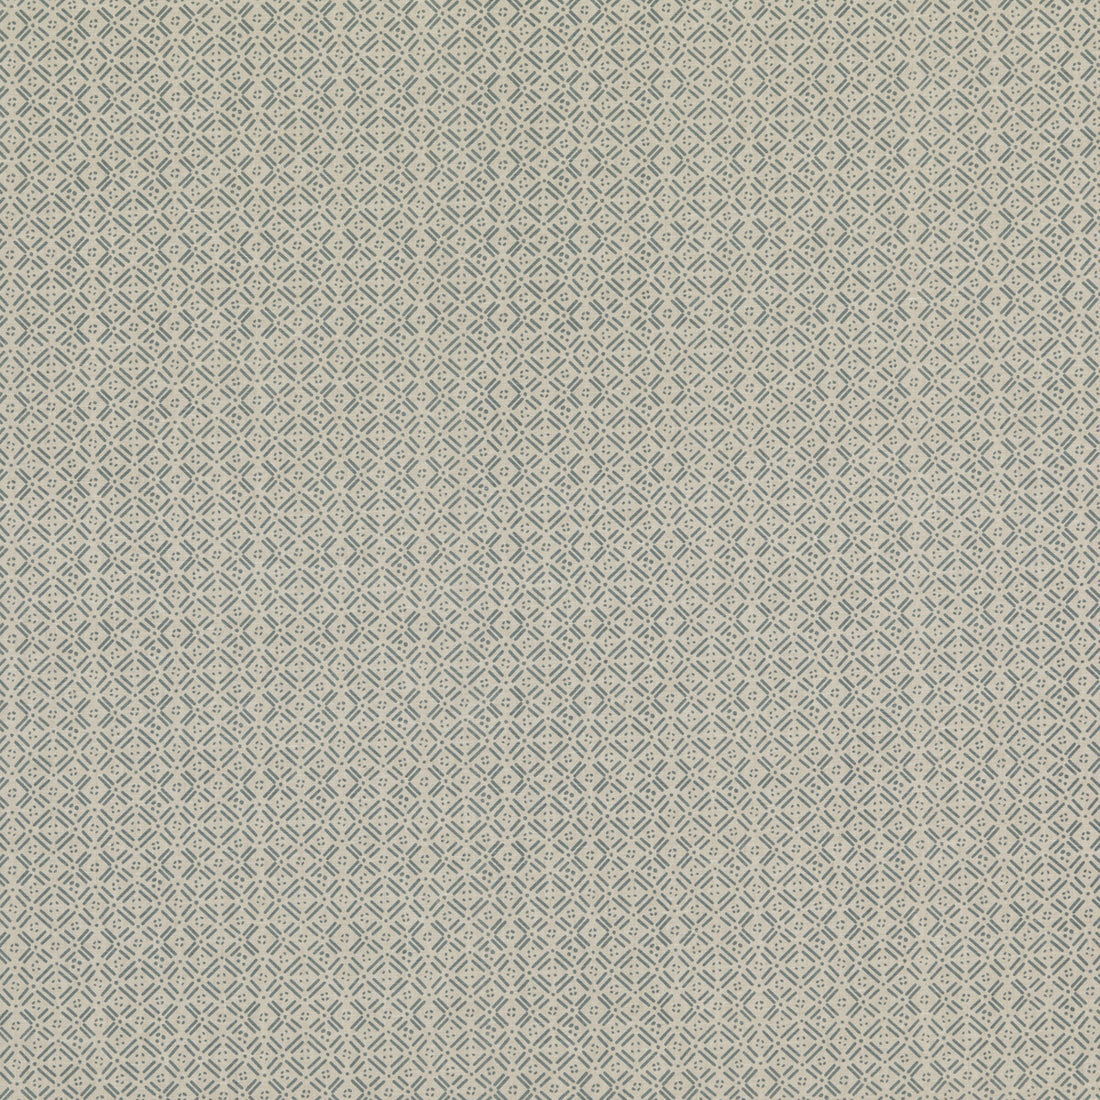 Aslin fabric in teal color - pattern ED75036.2.0 - by Threads in the Moro collection